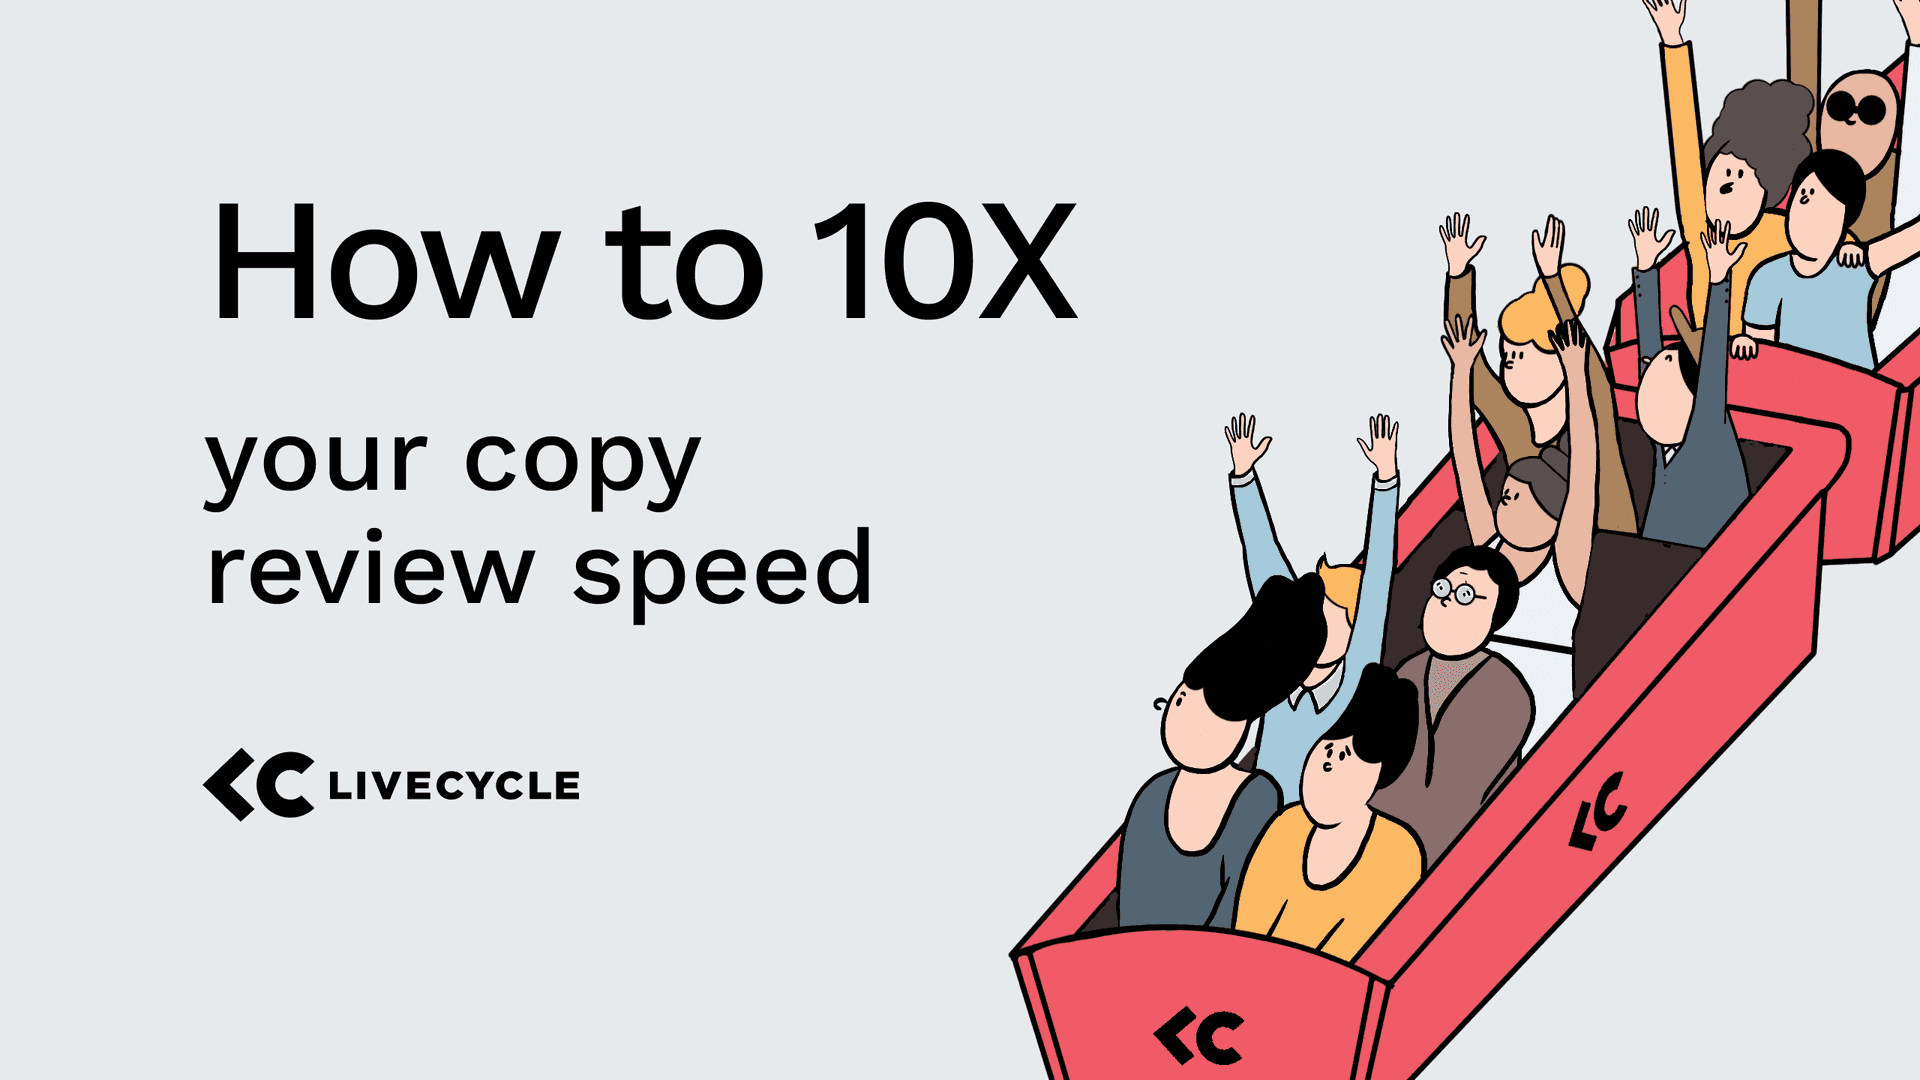 How to 10x Your Copy Review Speed Using Livecycle